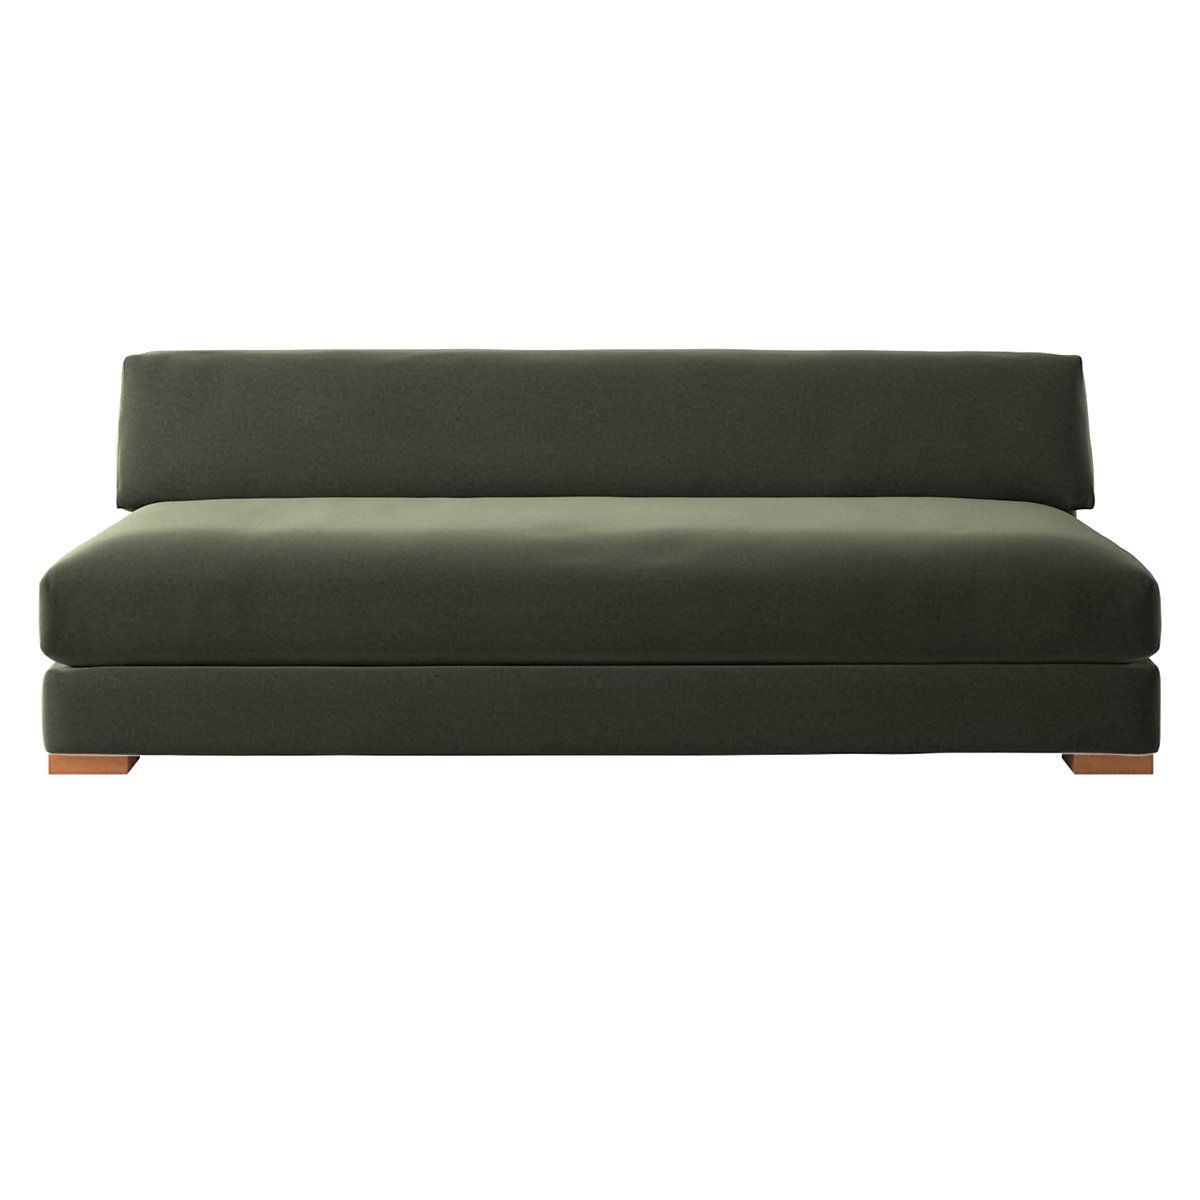 Piazza Sofa + Reviews | Cb2 For Camila Poly Blend Sectional Sofas Off White (View 15 of 15)